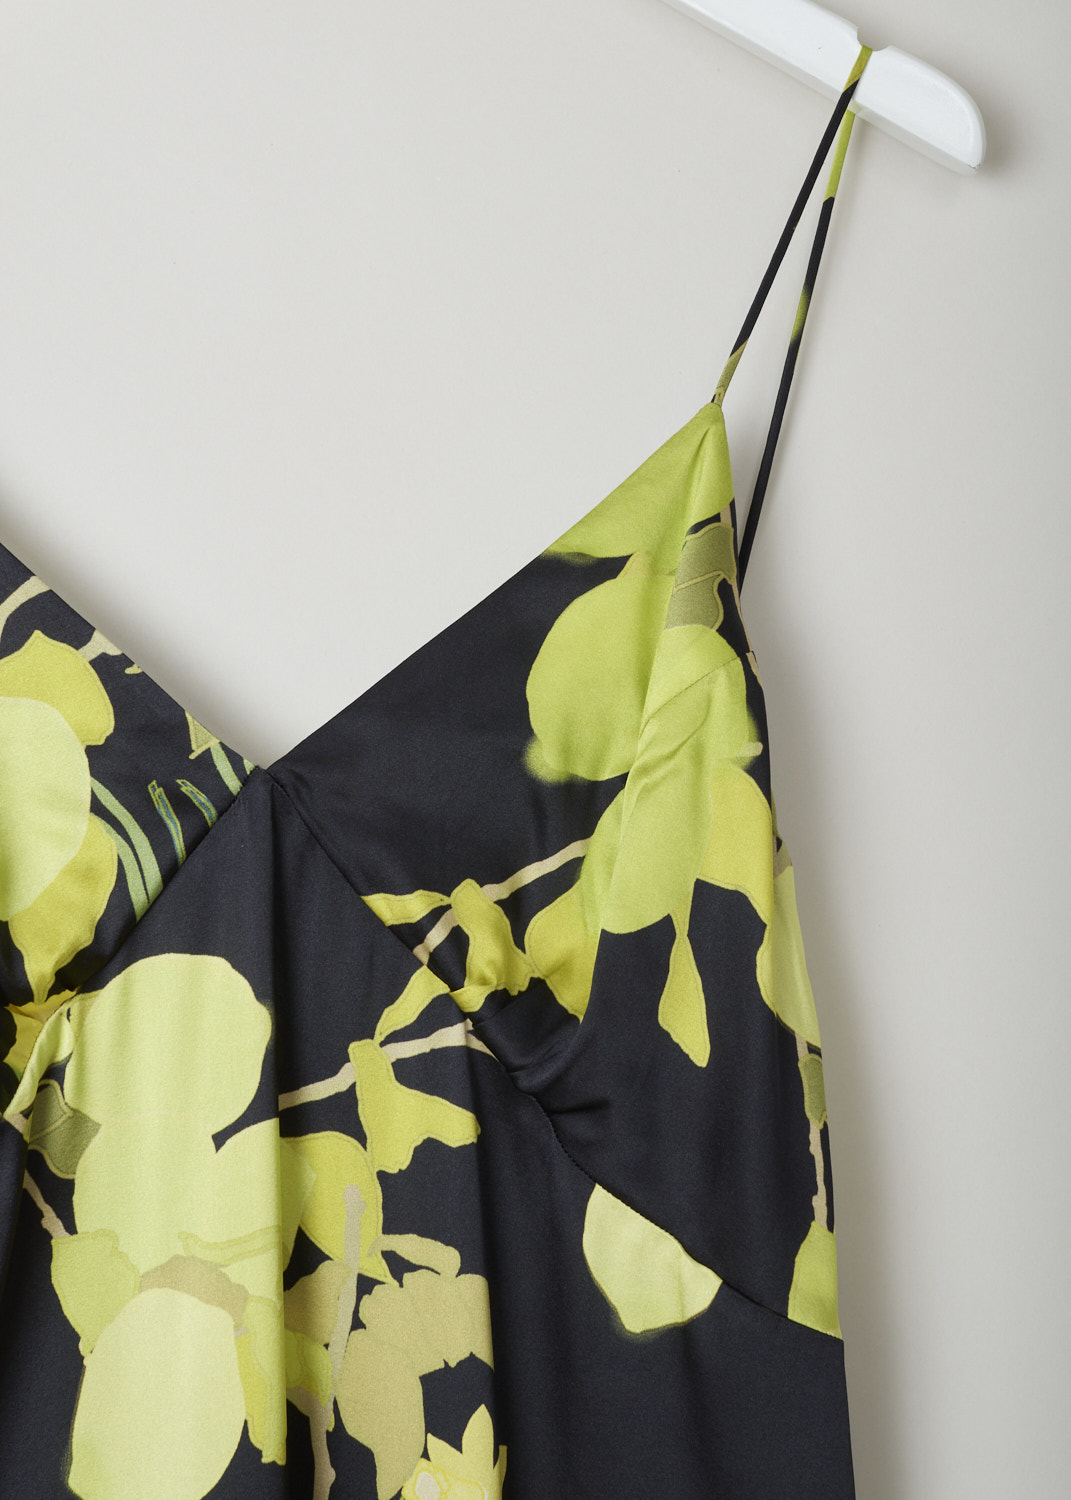 BERNADETTE, BLACK SILK SLIP DRESS WITH VIBRANT PRINT, HS22_RTW_SLDRESS_JEA_SSS_2, Black, Print, Detail, Silky smooth black satin midi dress with lime green print. The dress has a V-shaped neckline with barely-there straps. It's decorated with vibrant lemons and daffodils. 